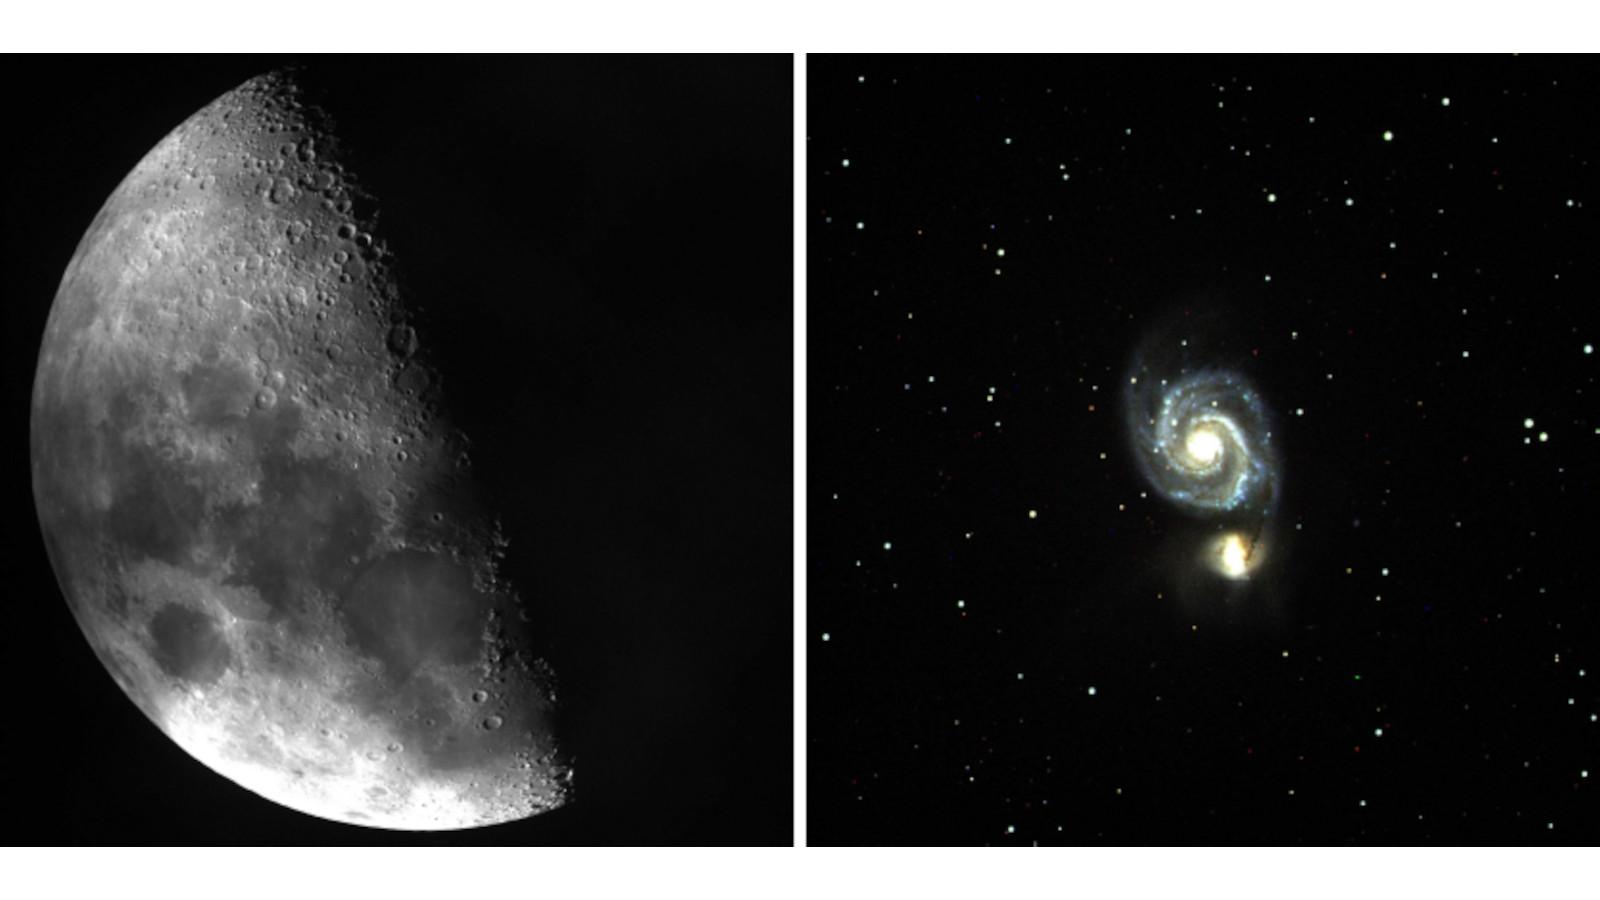 DEMONEXT images of teh quarter moon (left) and spiral galaxy M51 (right)